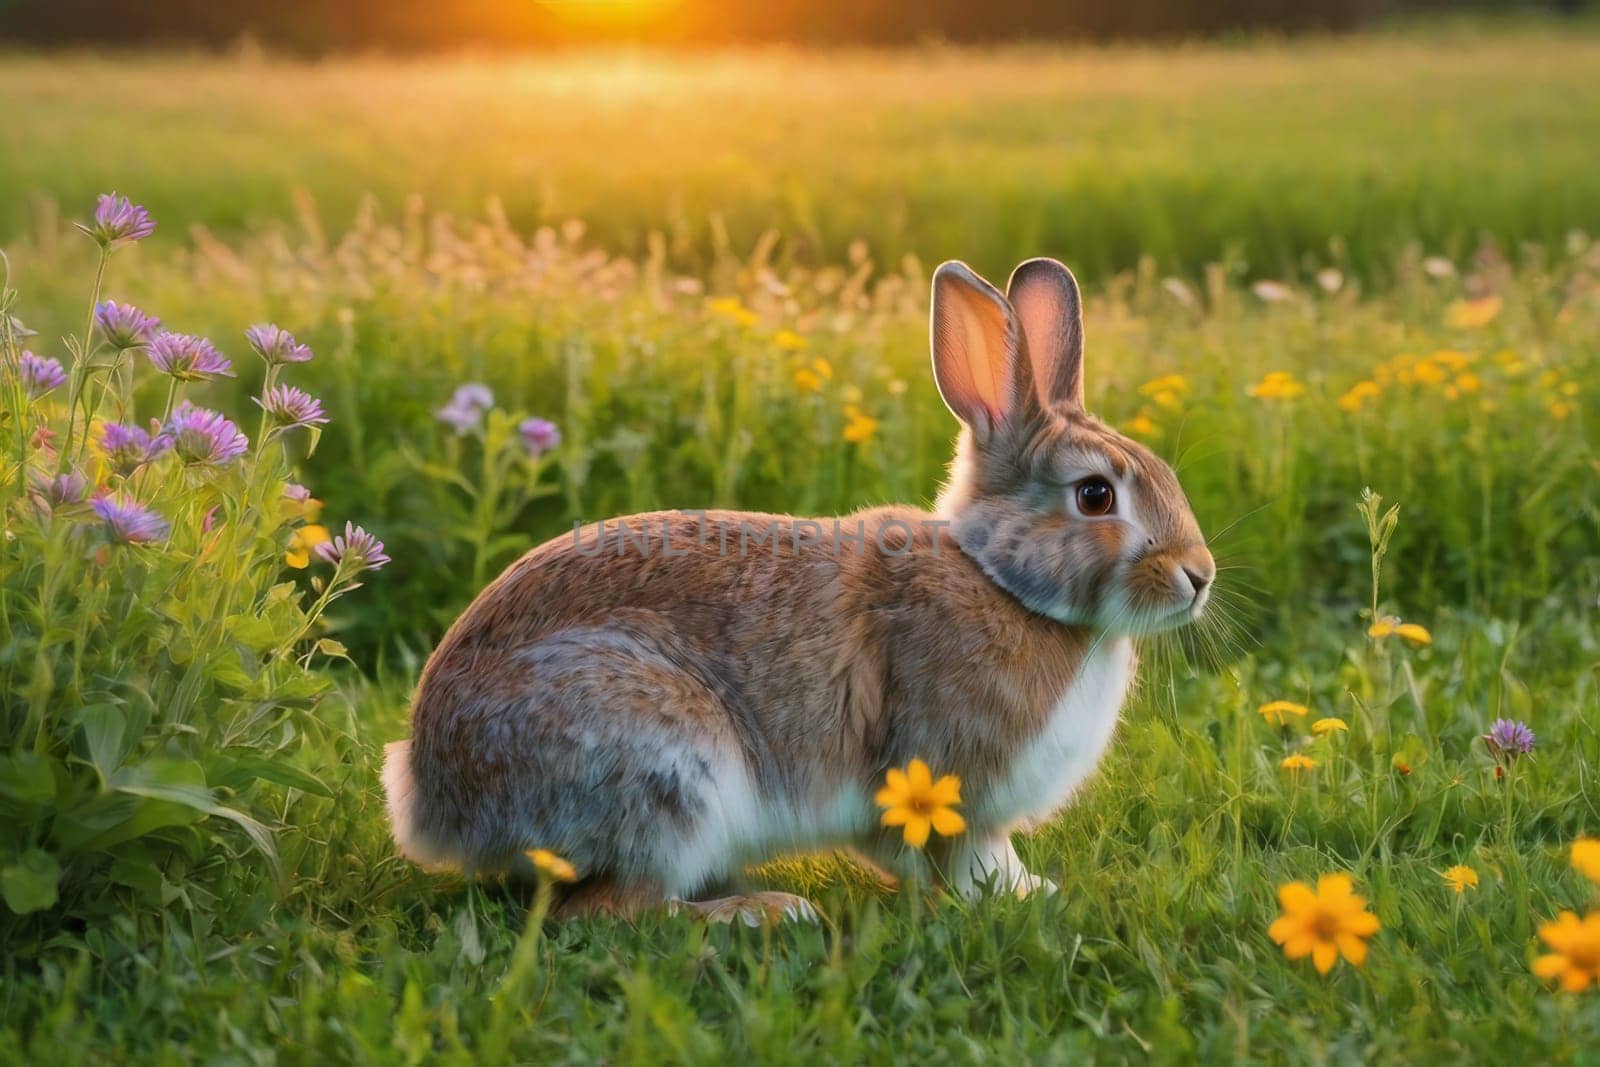 Rabbit on the lawn with flowers at sunset. by Ekaterina34